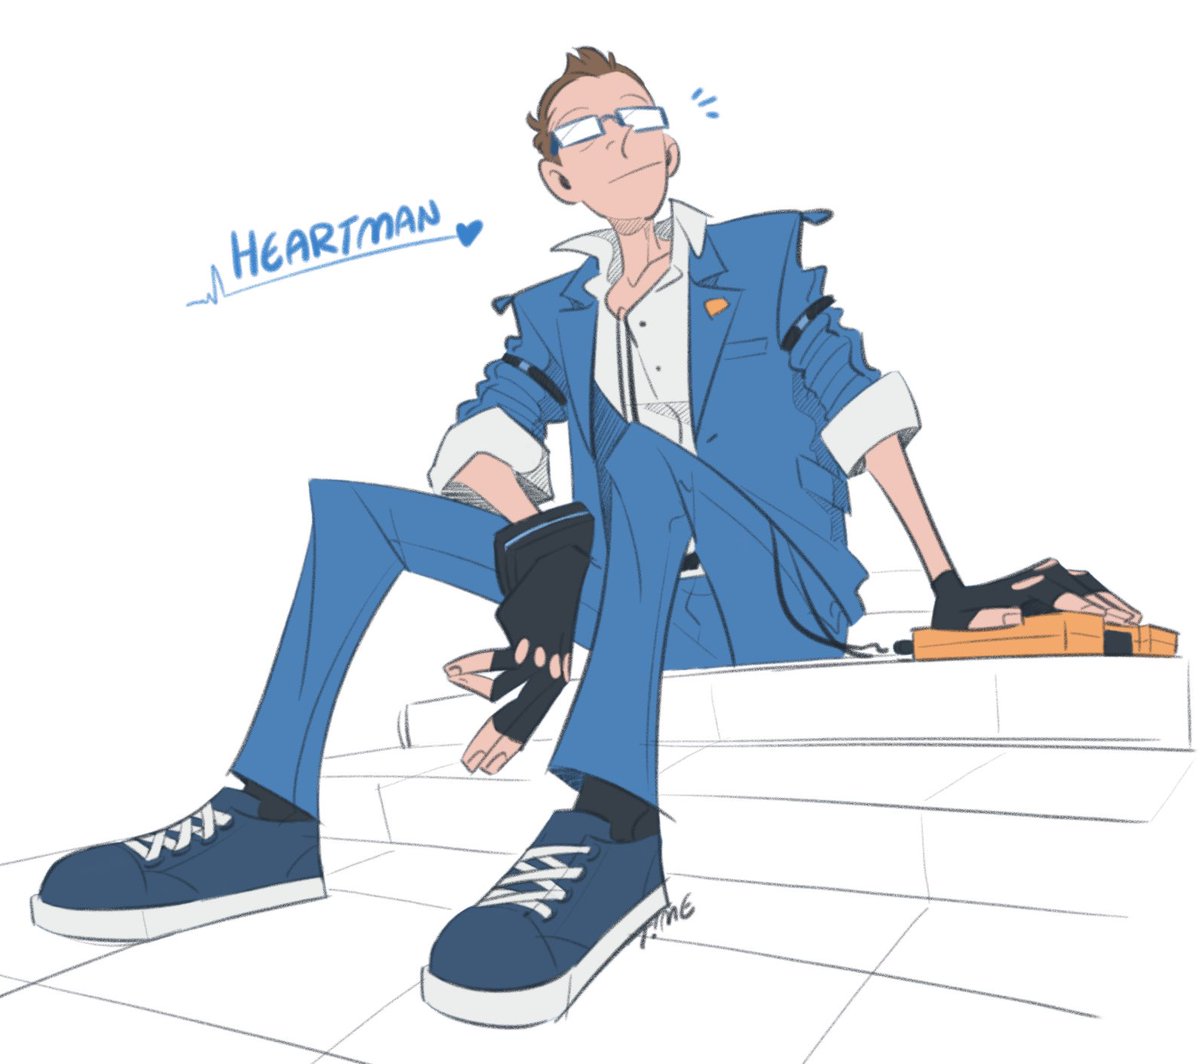 「No style consistency but Heartman  #Deat」|TimetheHoboのイラスト